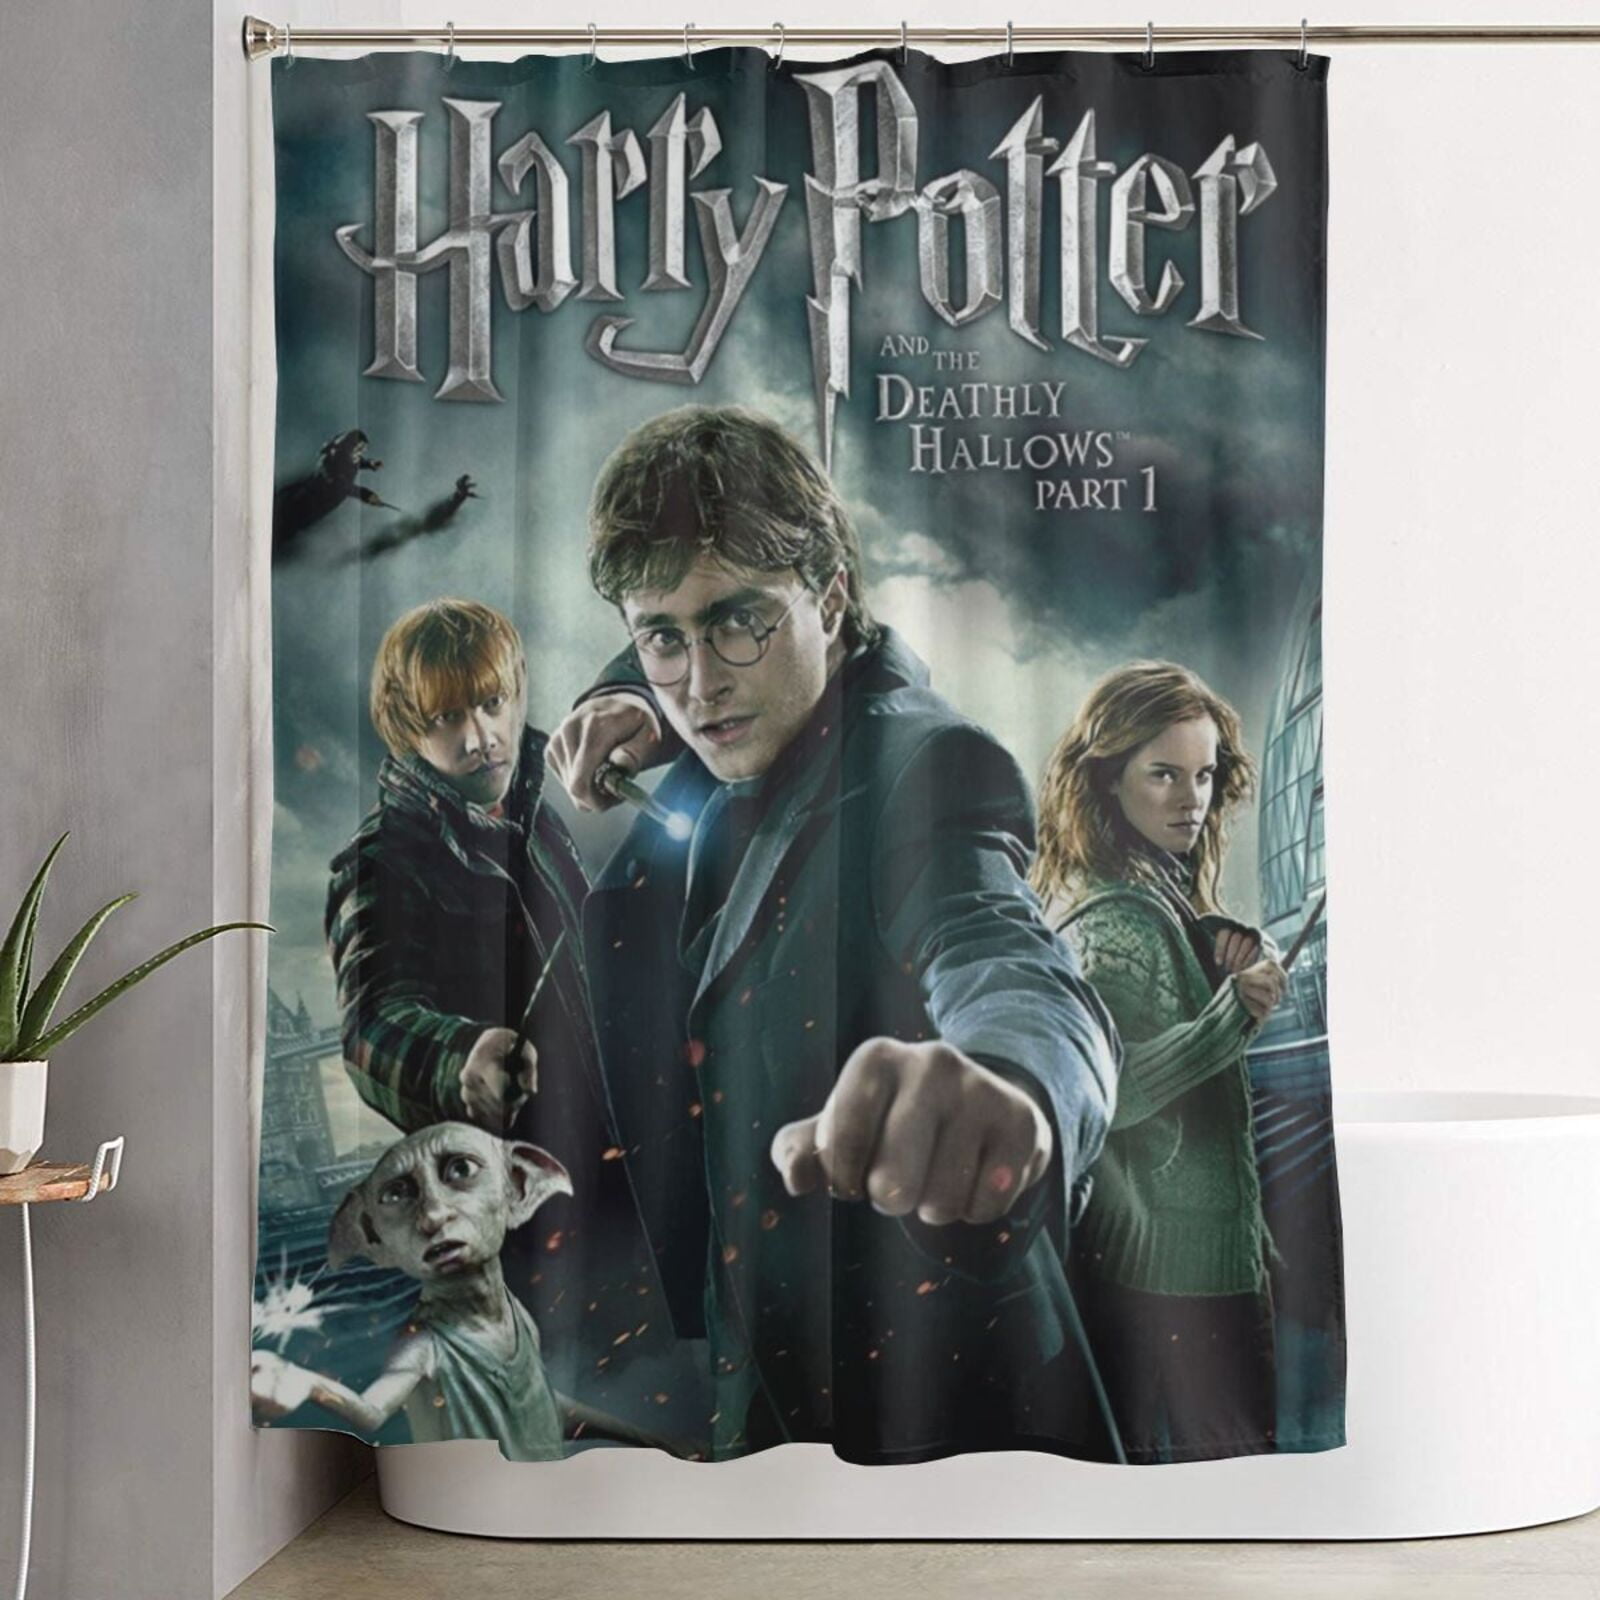 Harry Potter Shower Curtain Bathroom Decor Polyester Waterproof Bath Curtains with Hooks 60x72 Inches, Size: Plastic